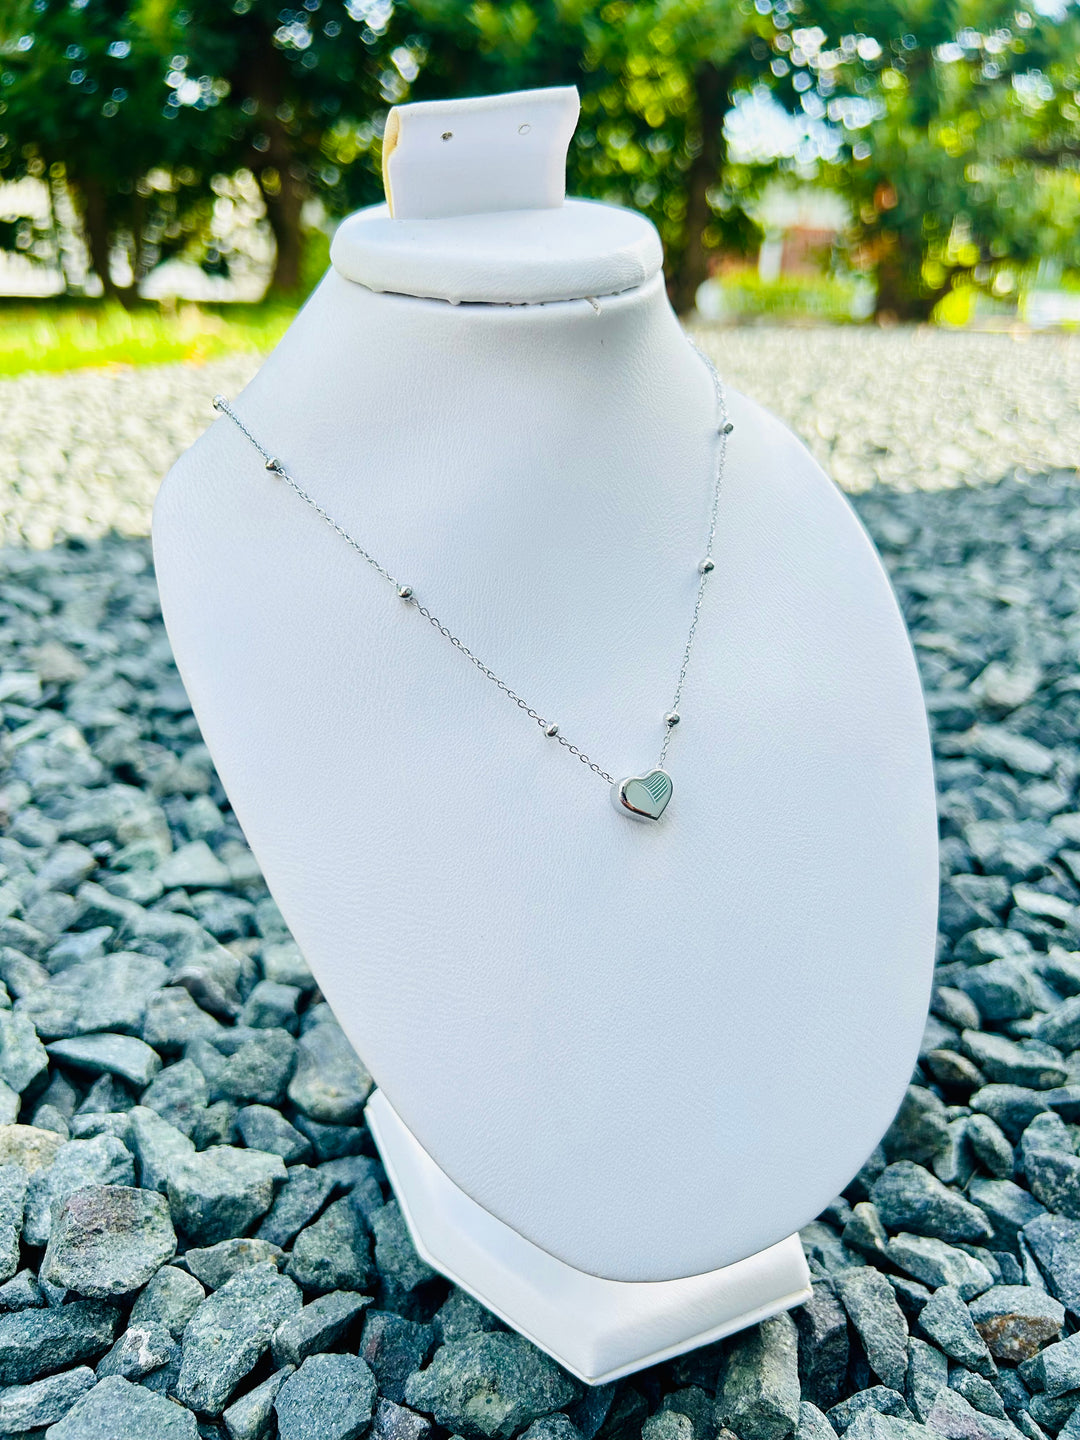 Silver Love Necklace